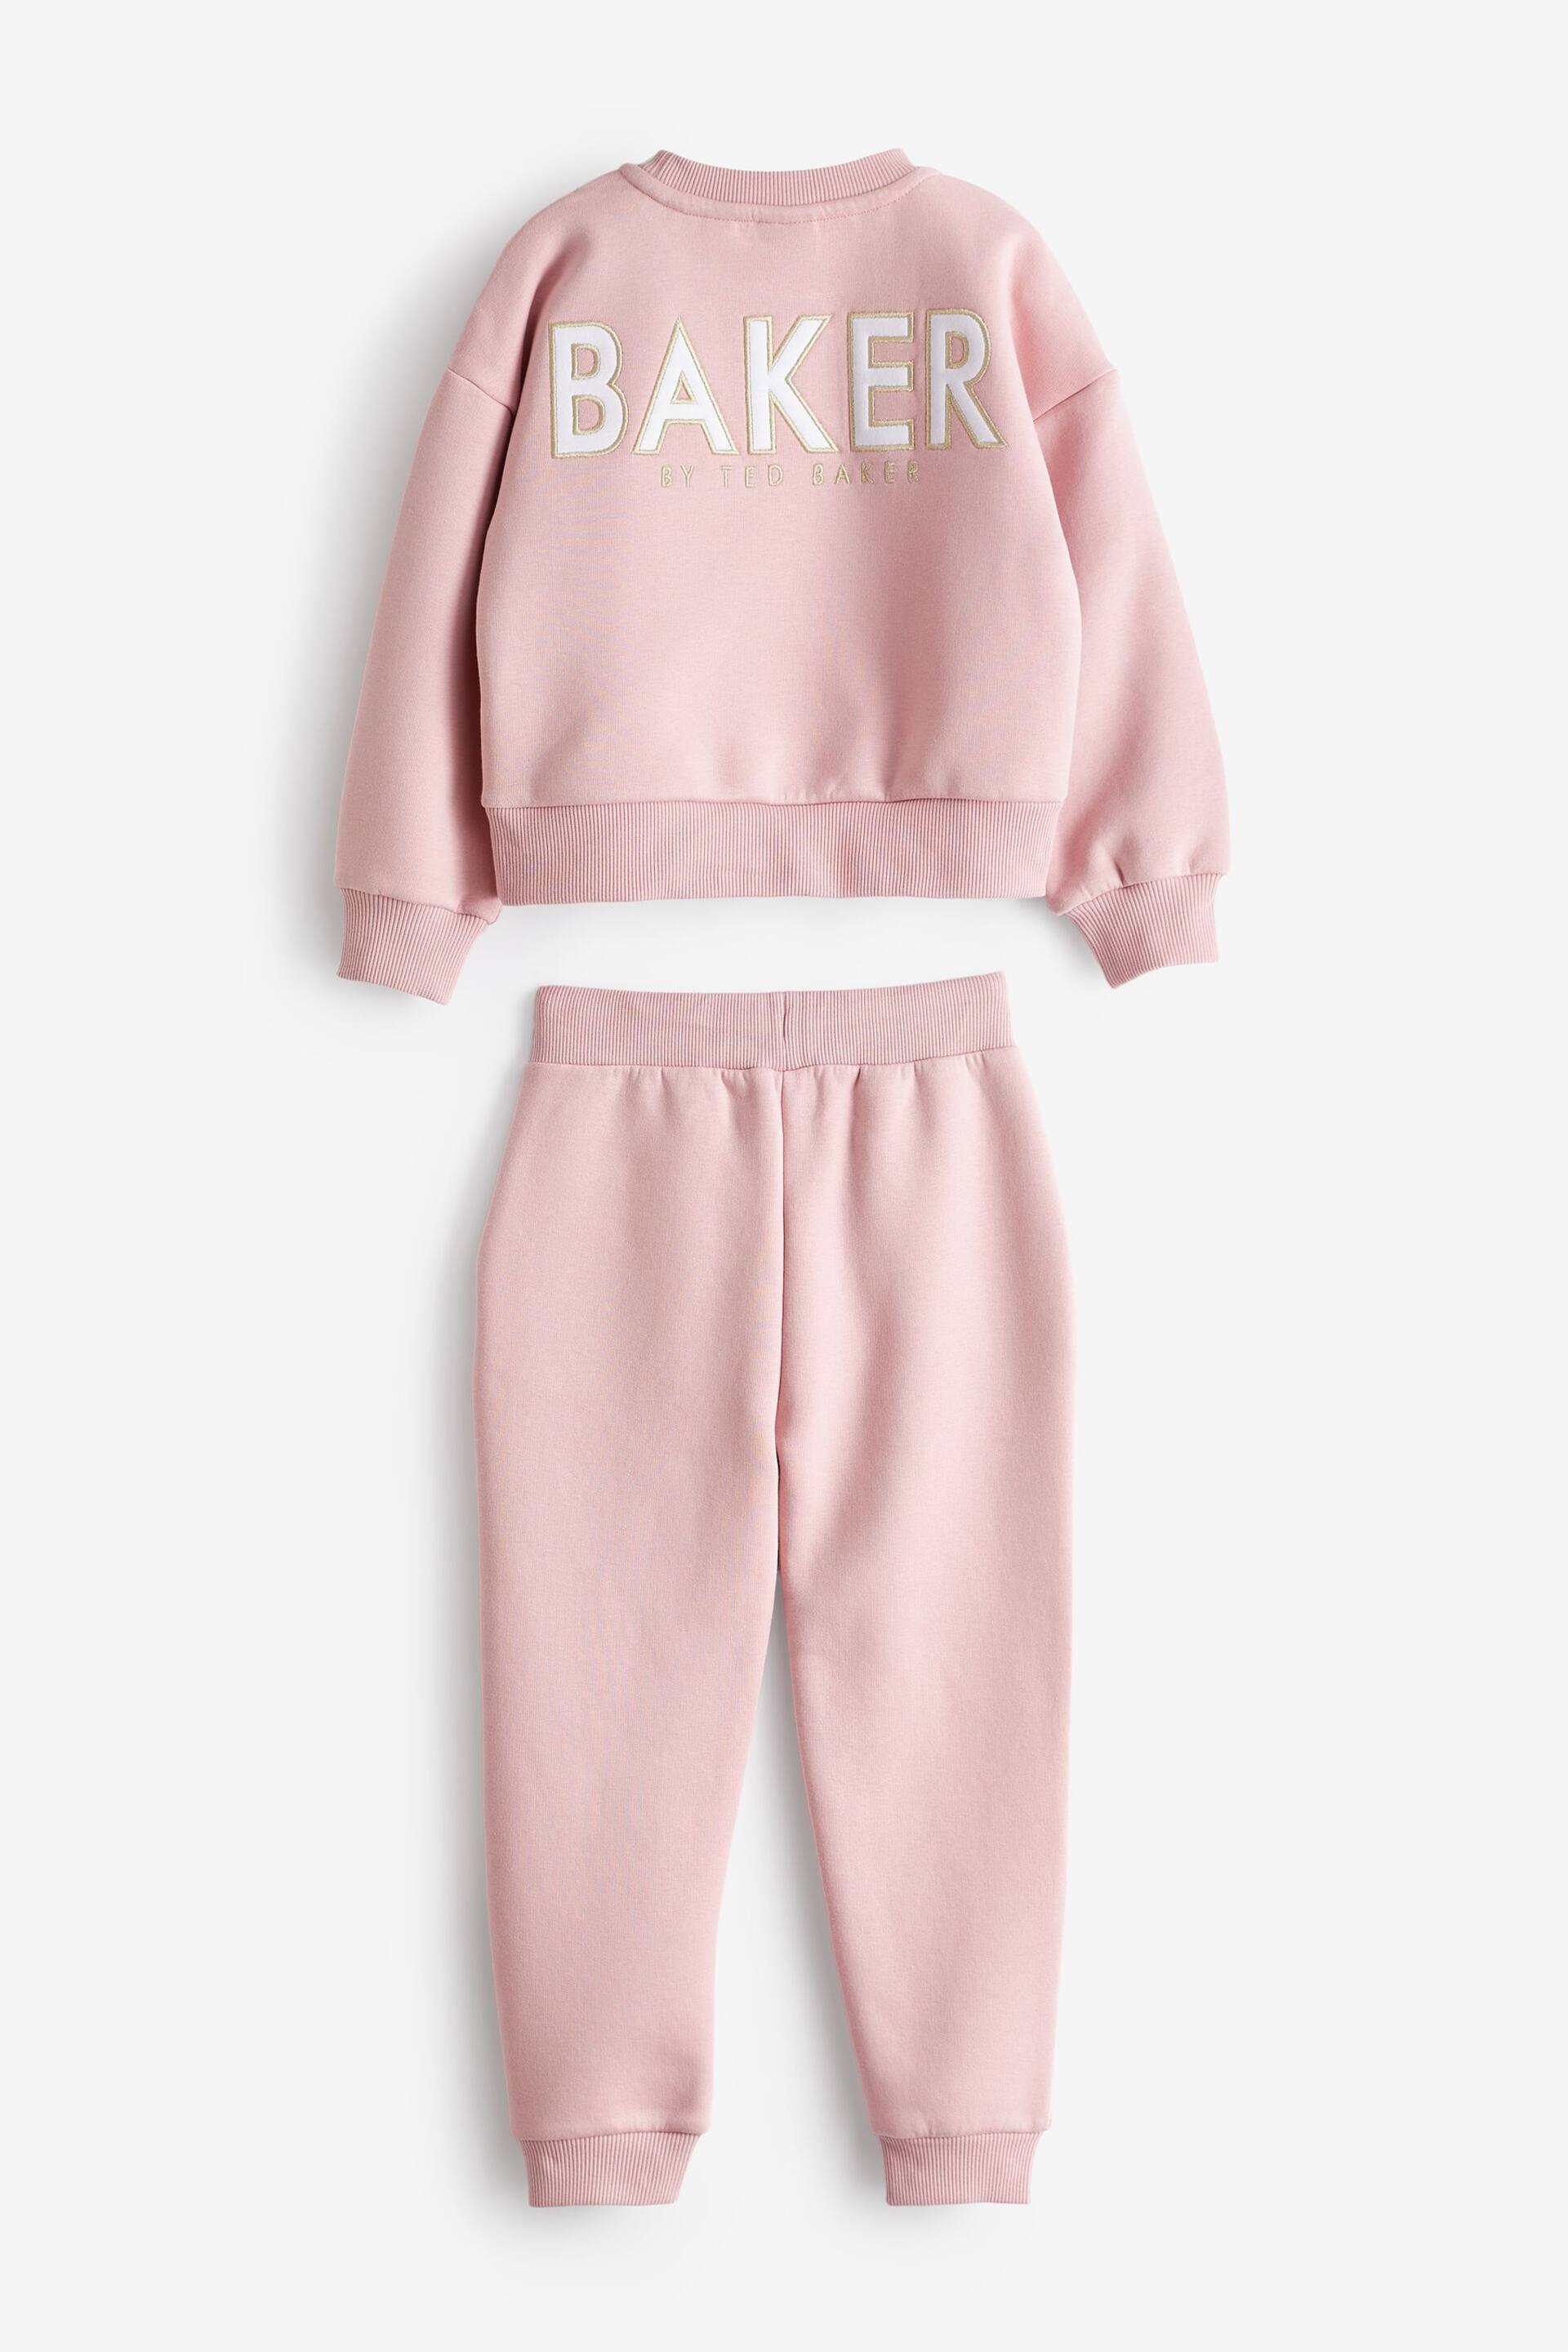 Baker by Ted Baker Varsity Sweater And Joggers Set - Image 8 of 10